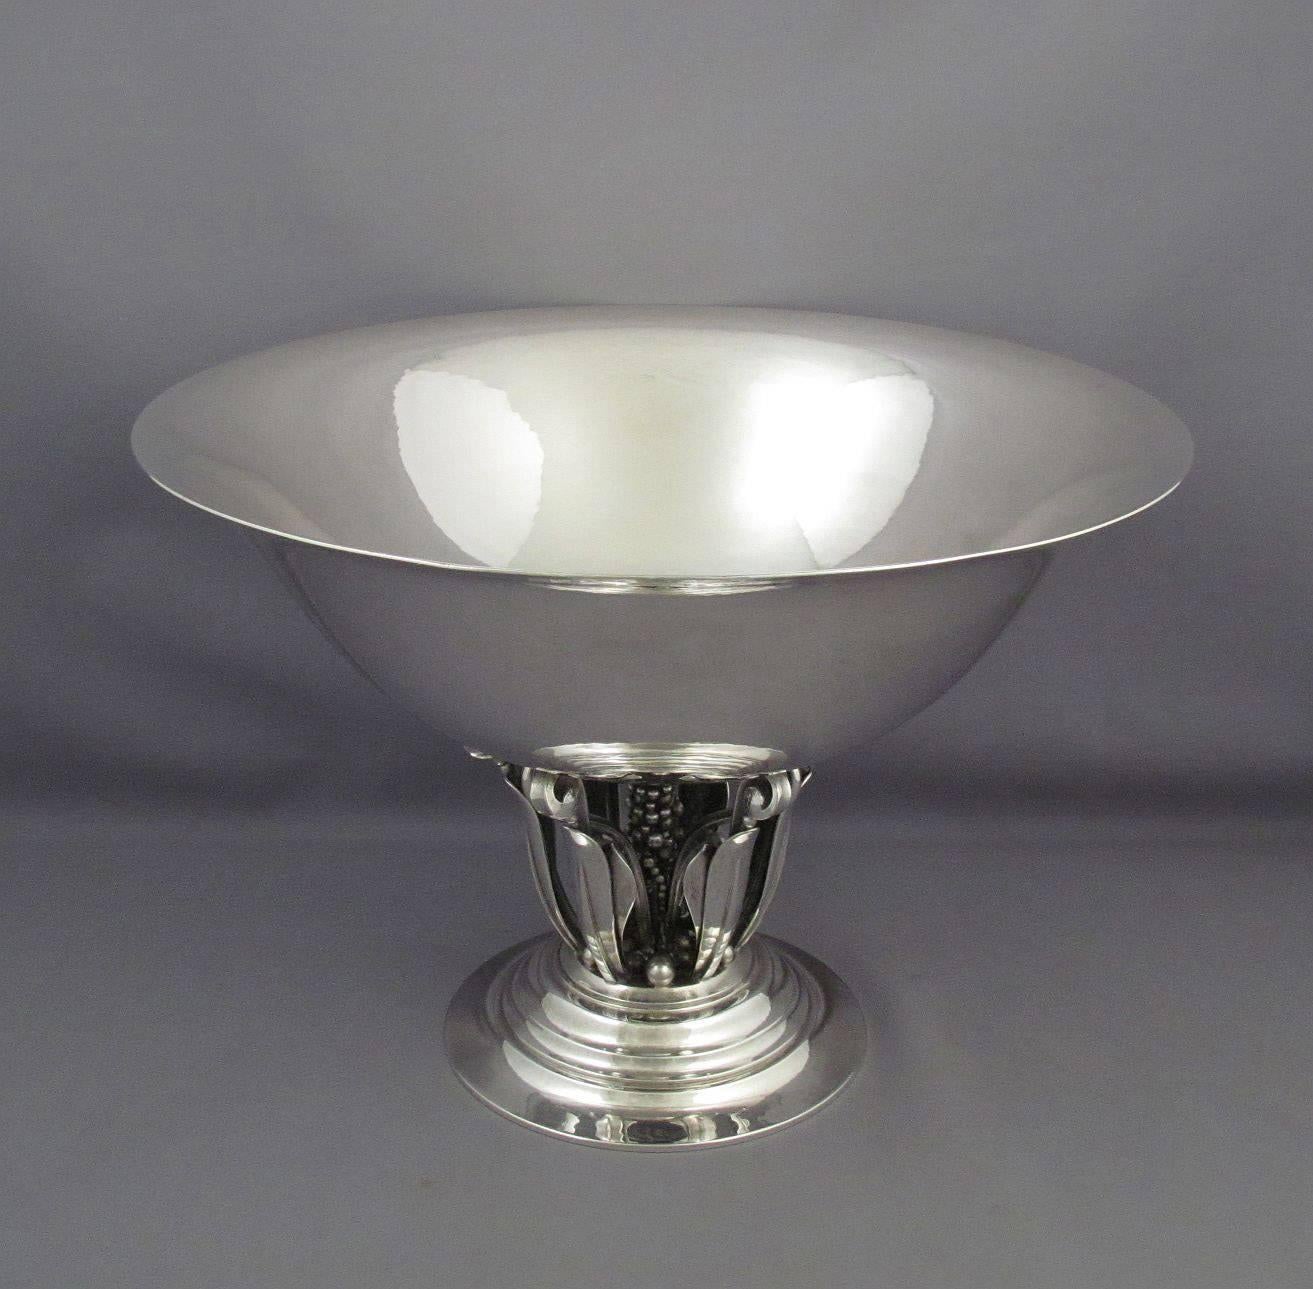 Large sterling silver centrepiece bowl by Georg Jensen with post 1945 marks, design #196 from 1916 by Johan Rohde. The flaring circular bowl supported by an openwork leaf and berry stem, on a stepped and domed circular base.
A bowl of this design